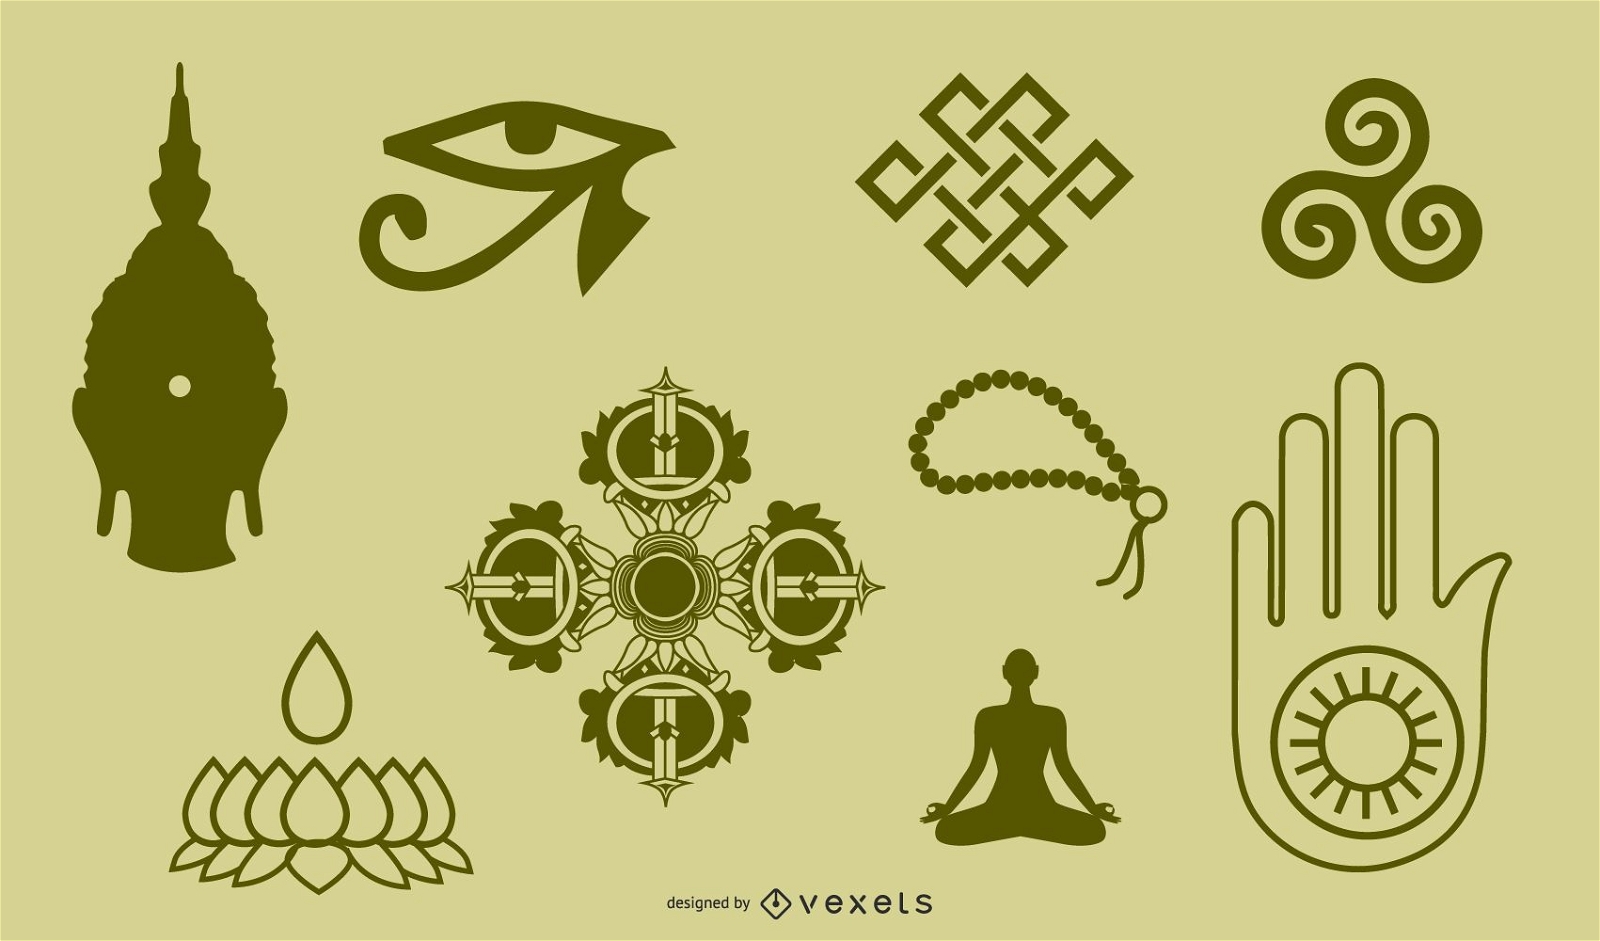 tibetan buddhist symbols and meanings